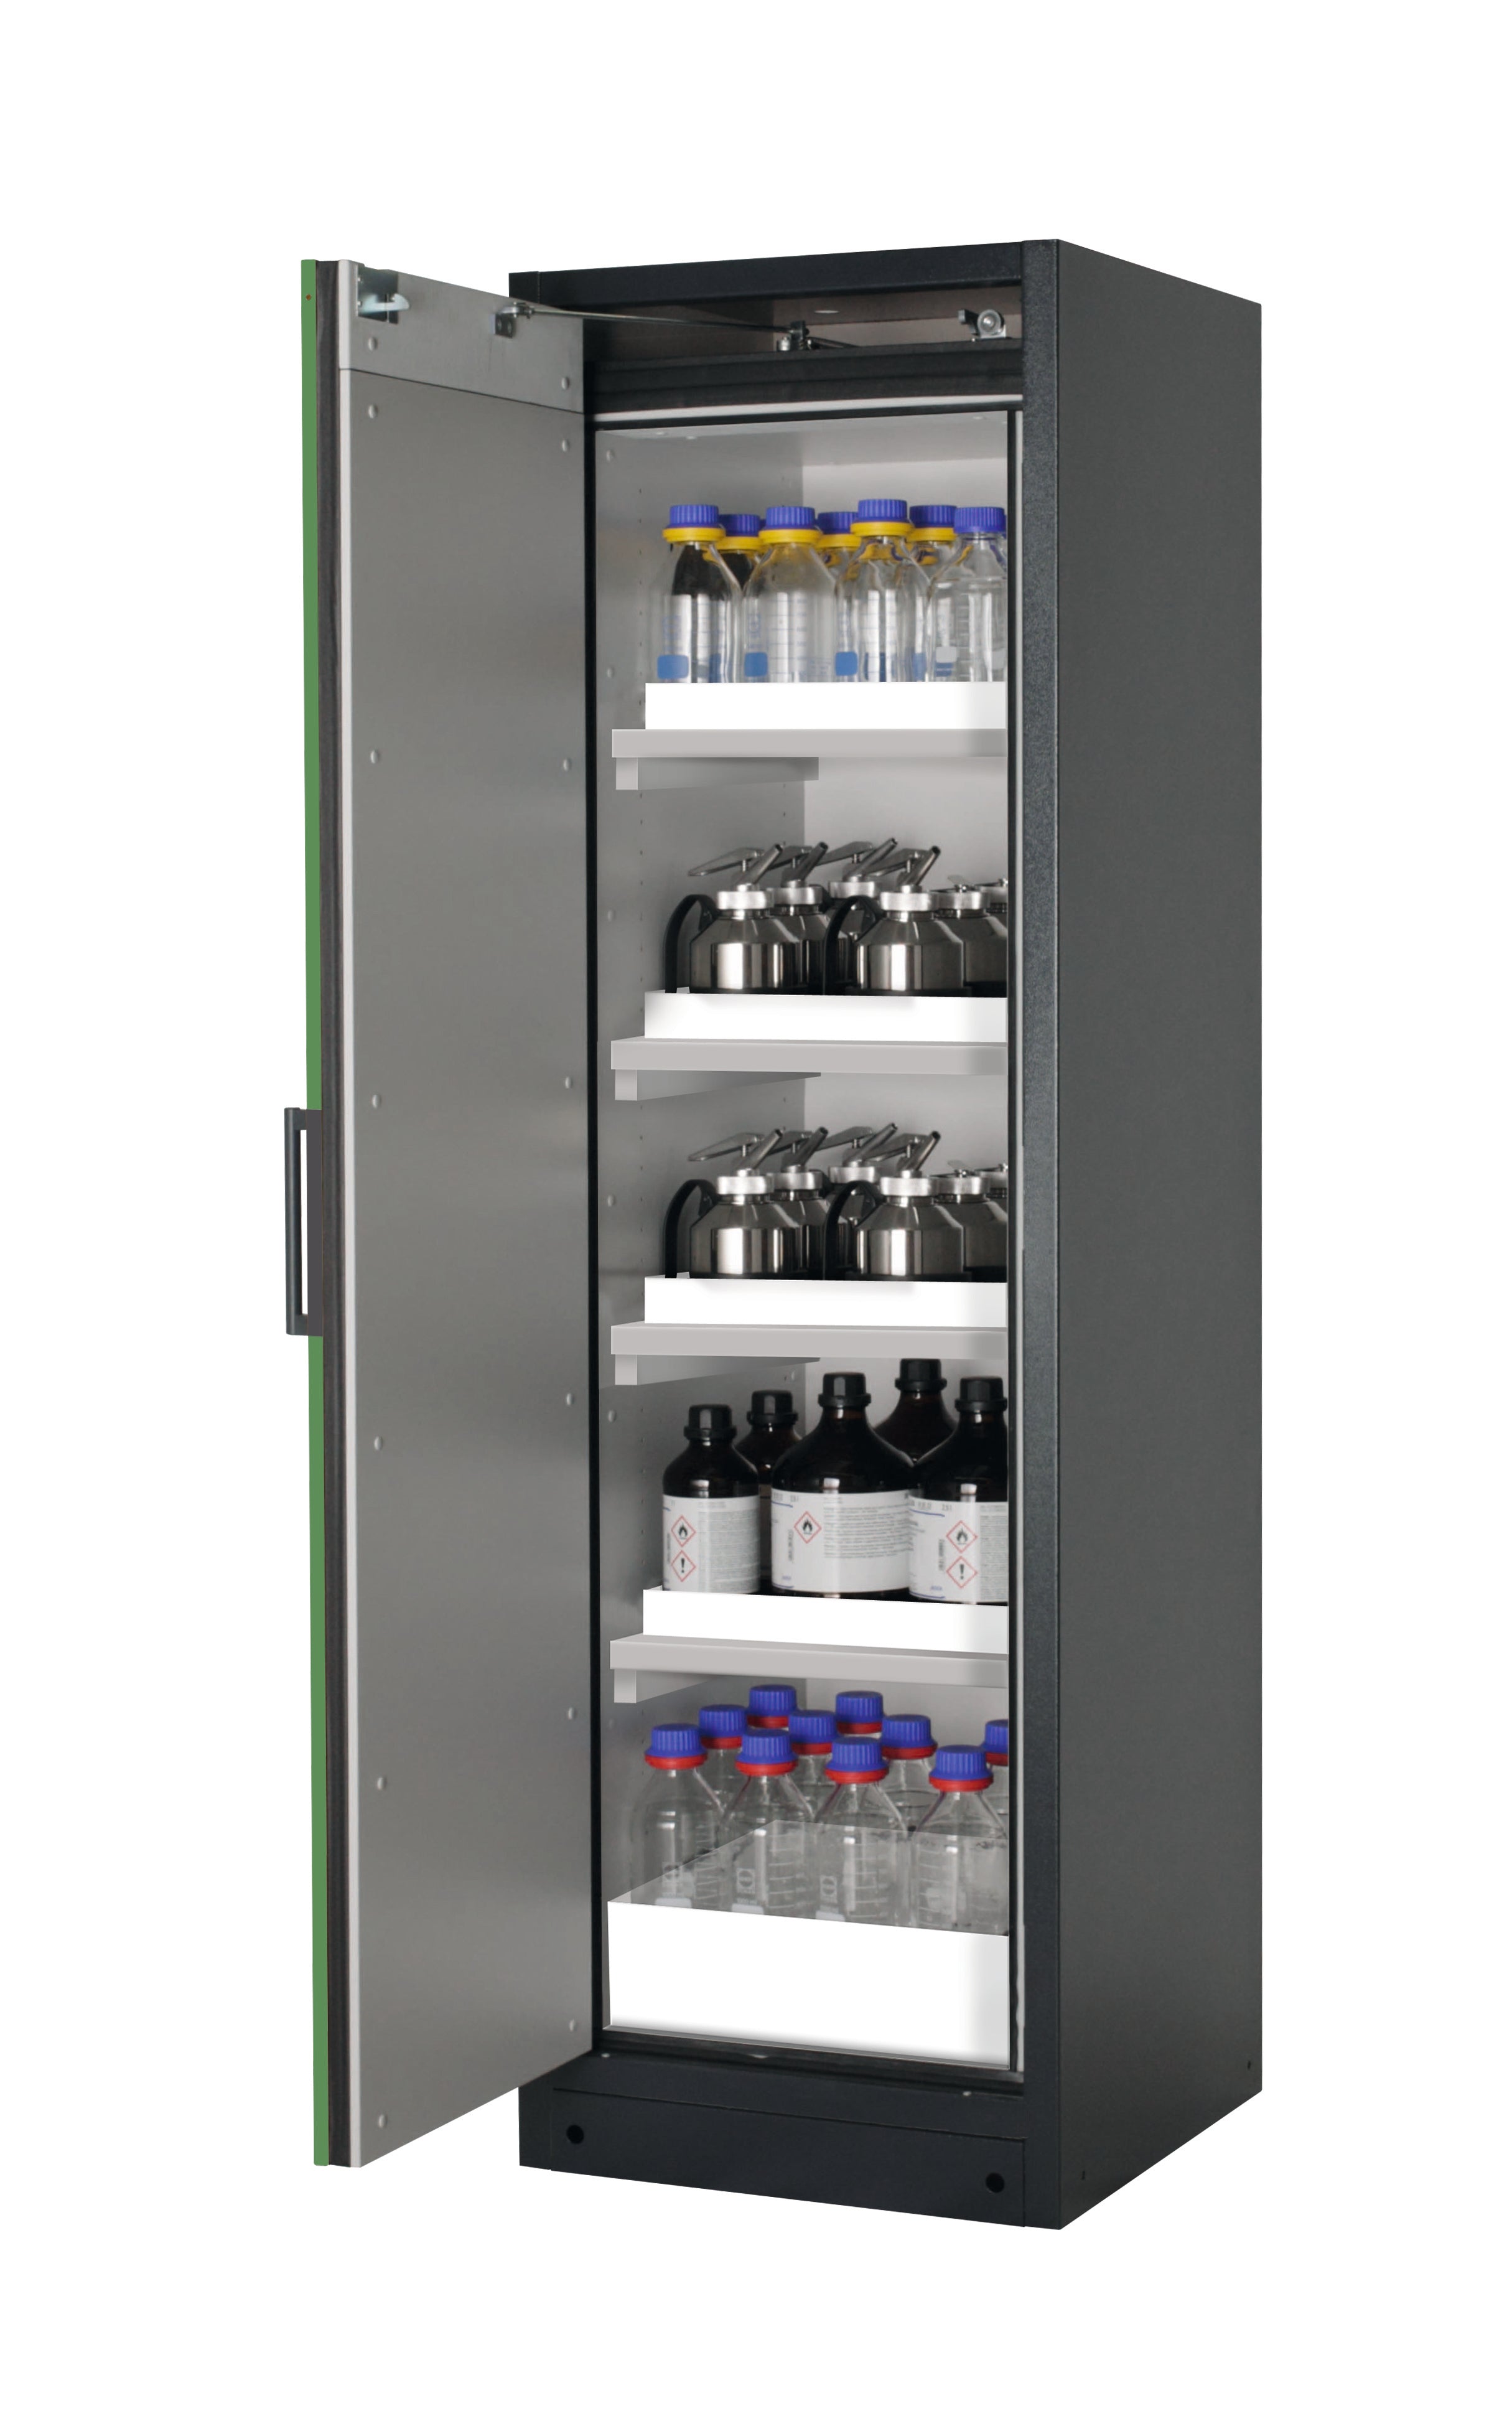 Type 90 safety storage cabinet Q-CLASSIC-90 model Q90.195.060 in reseda green RAL 6011 with 4x tray shelf (standard) (polypropylene),